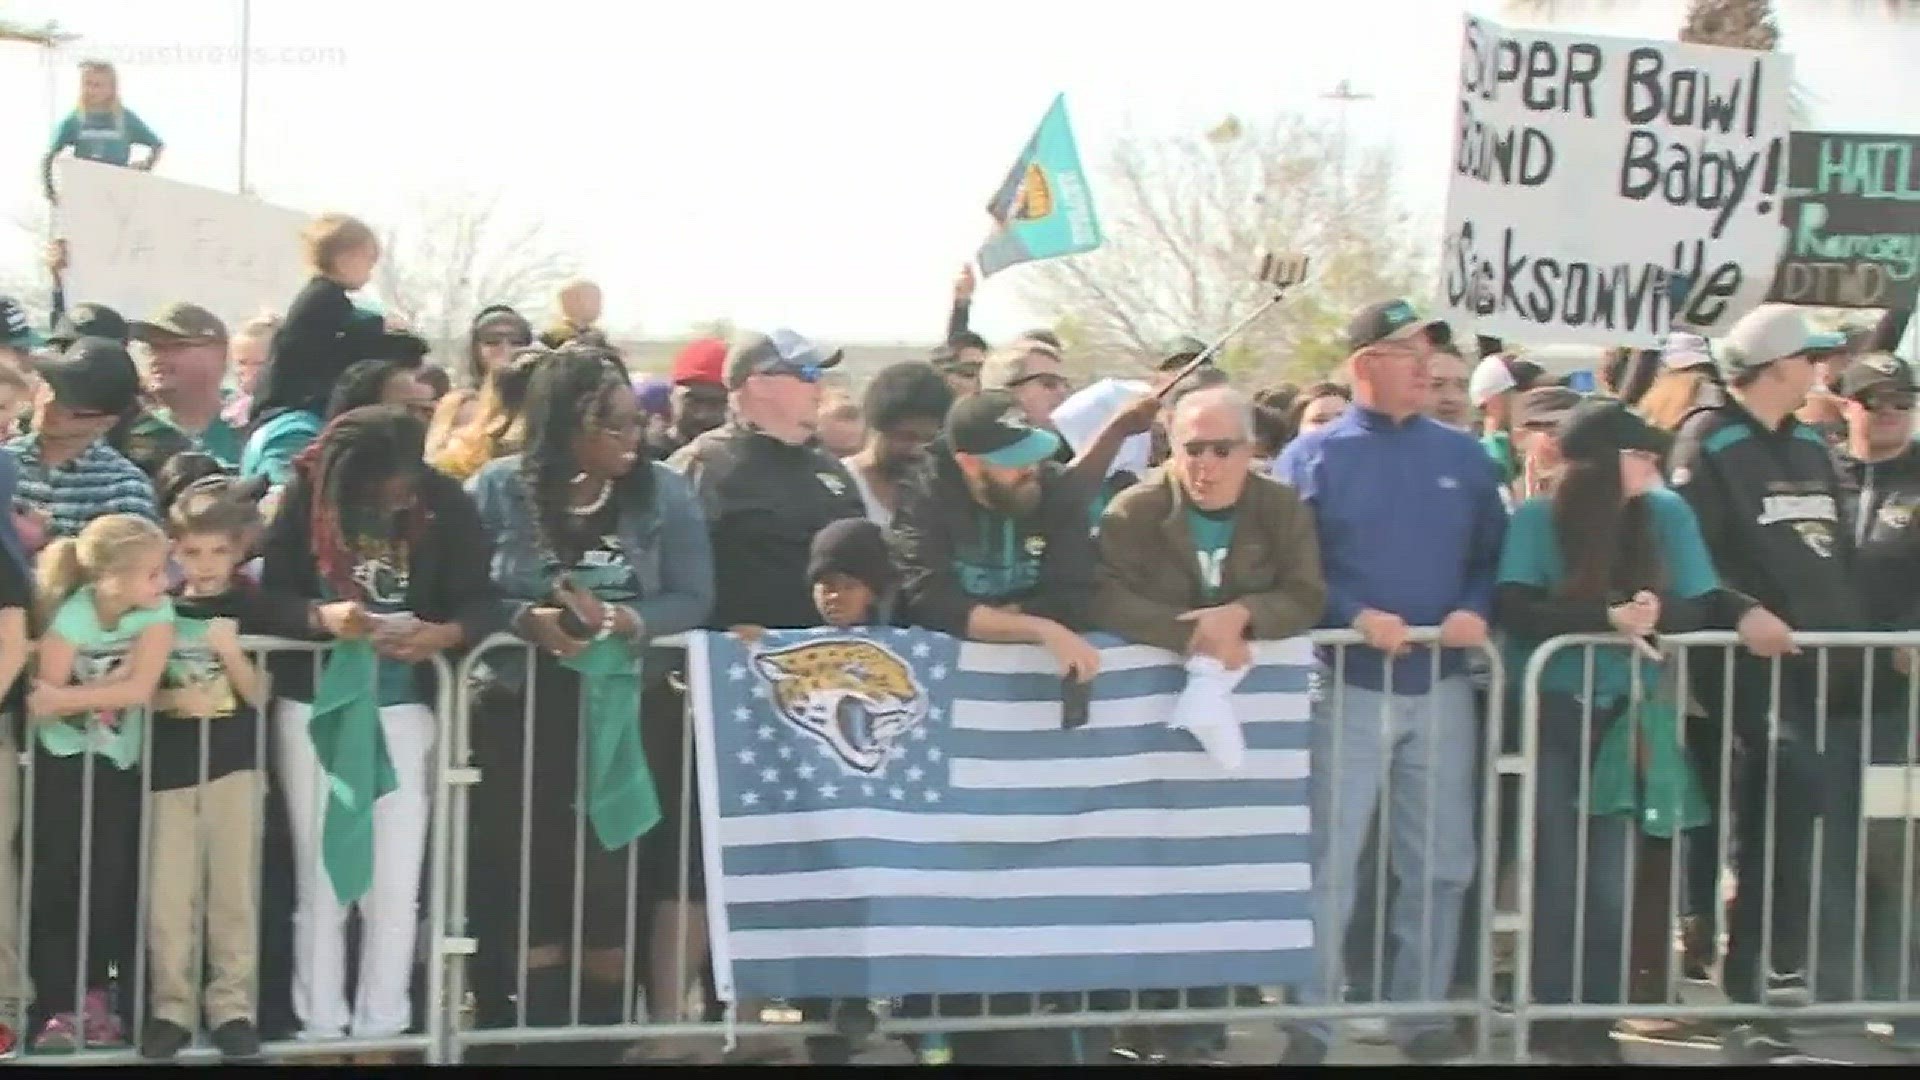 Jaguars fans are eager to see the team come home victorious against the New England Patriots on Sunday.